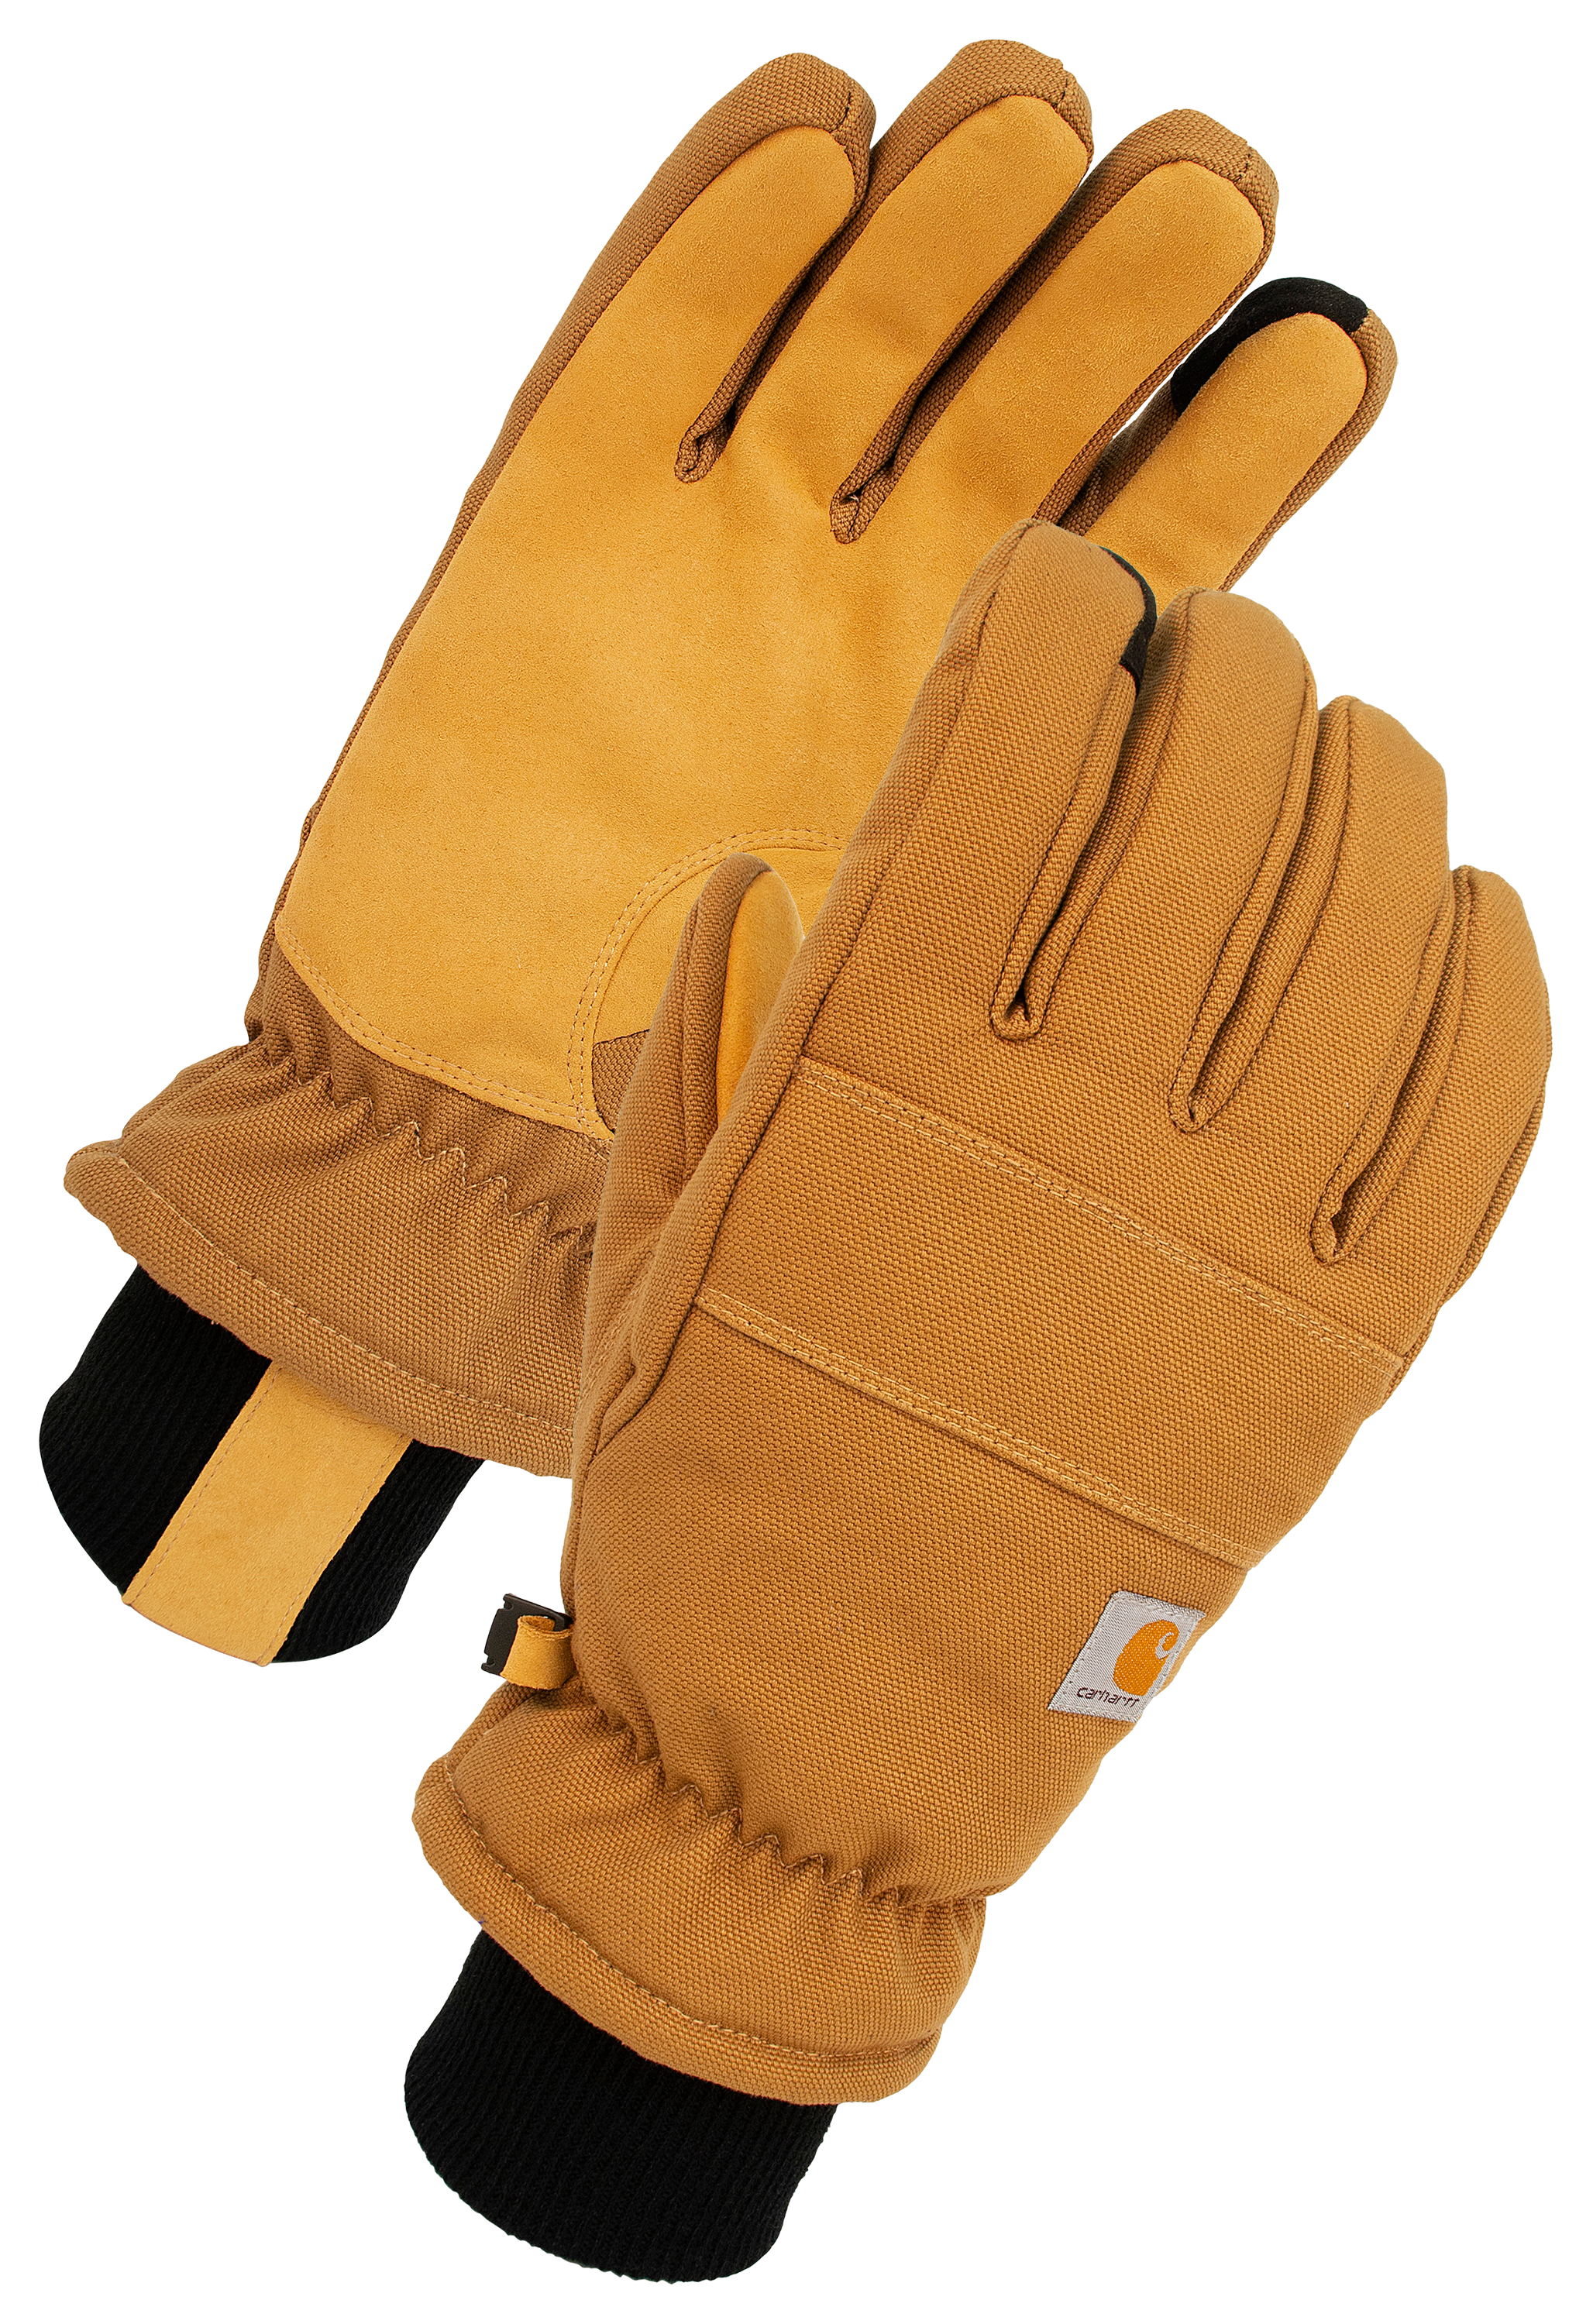 Carhartt Insulated Duck Synthetic Leather Knit Cuff Gloves for Men - Brown - XL